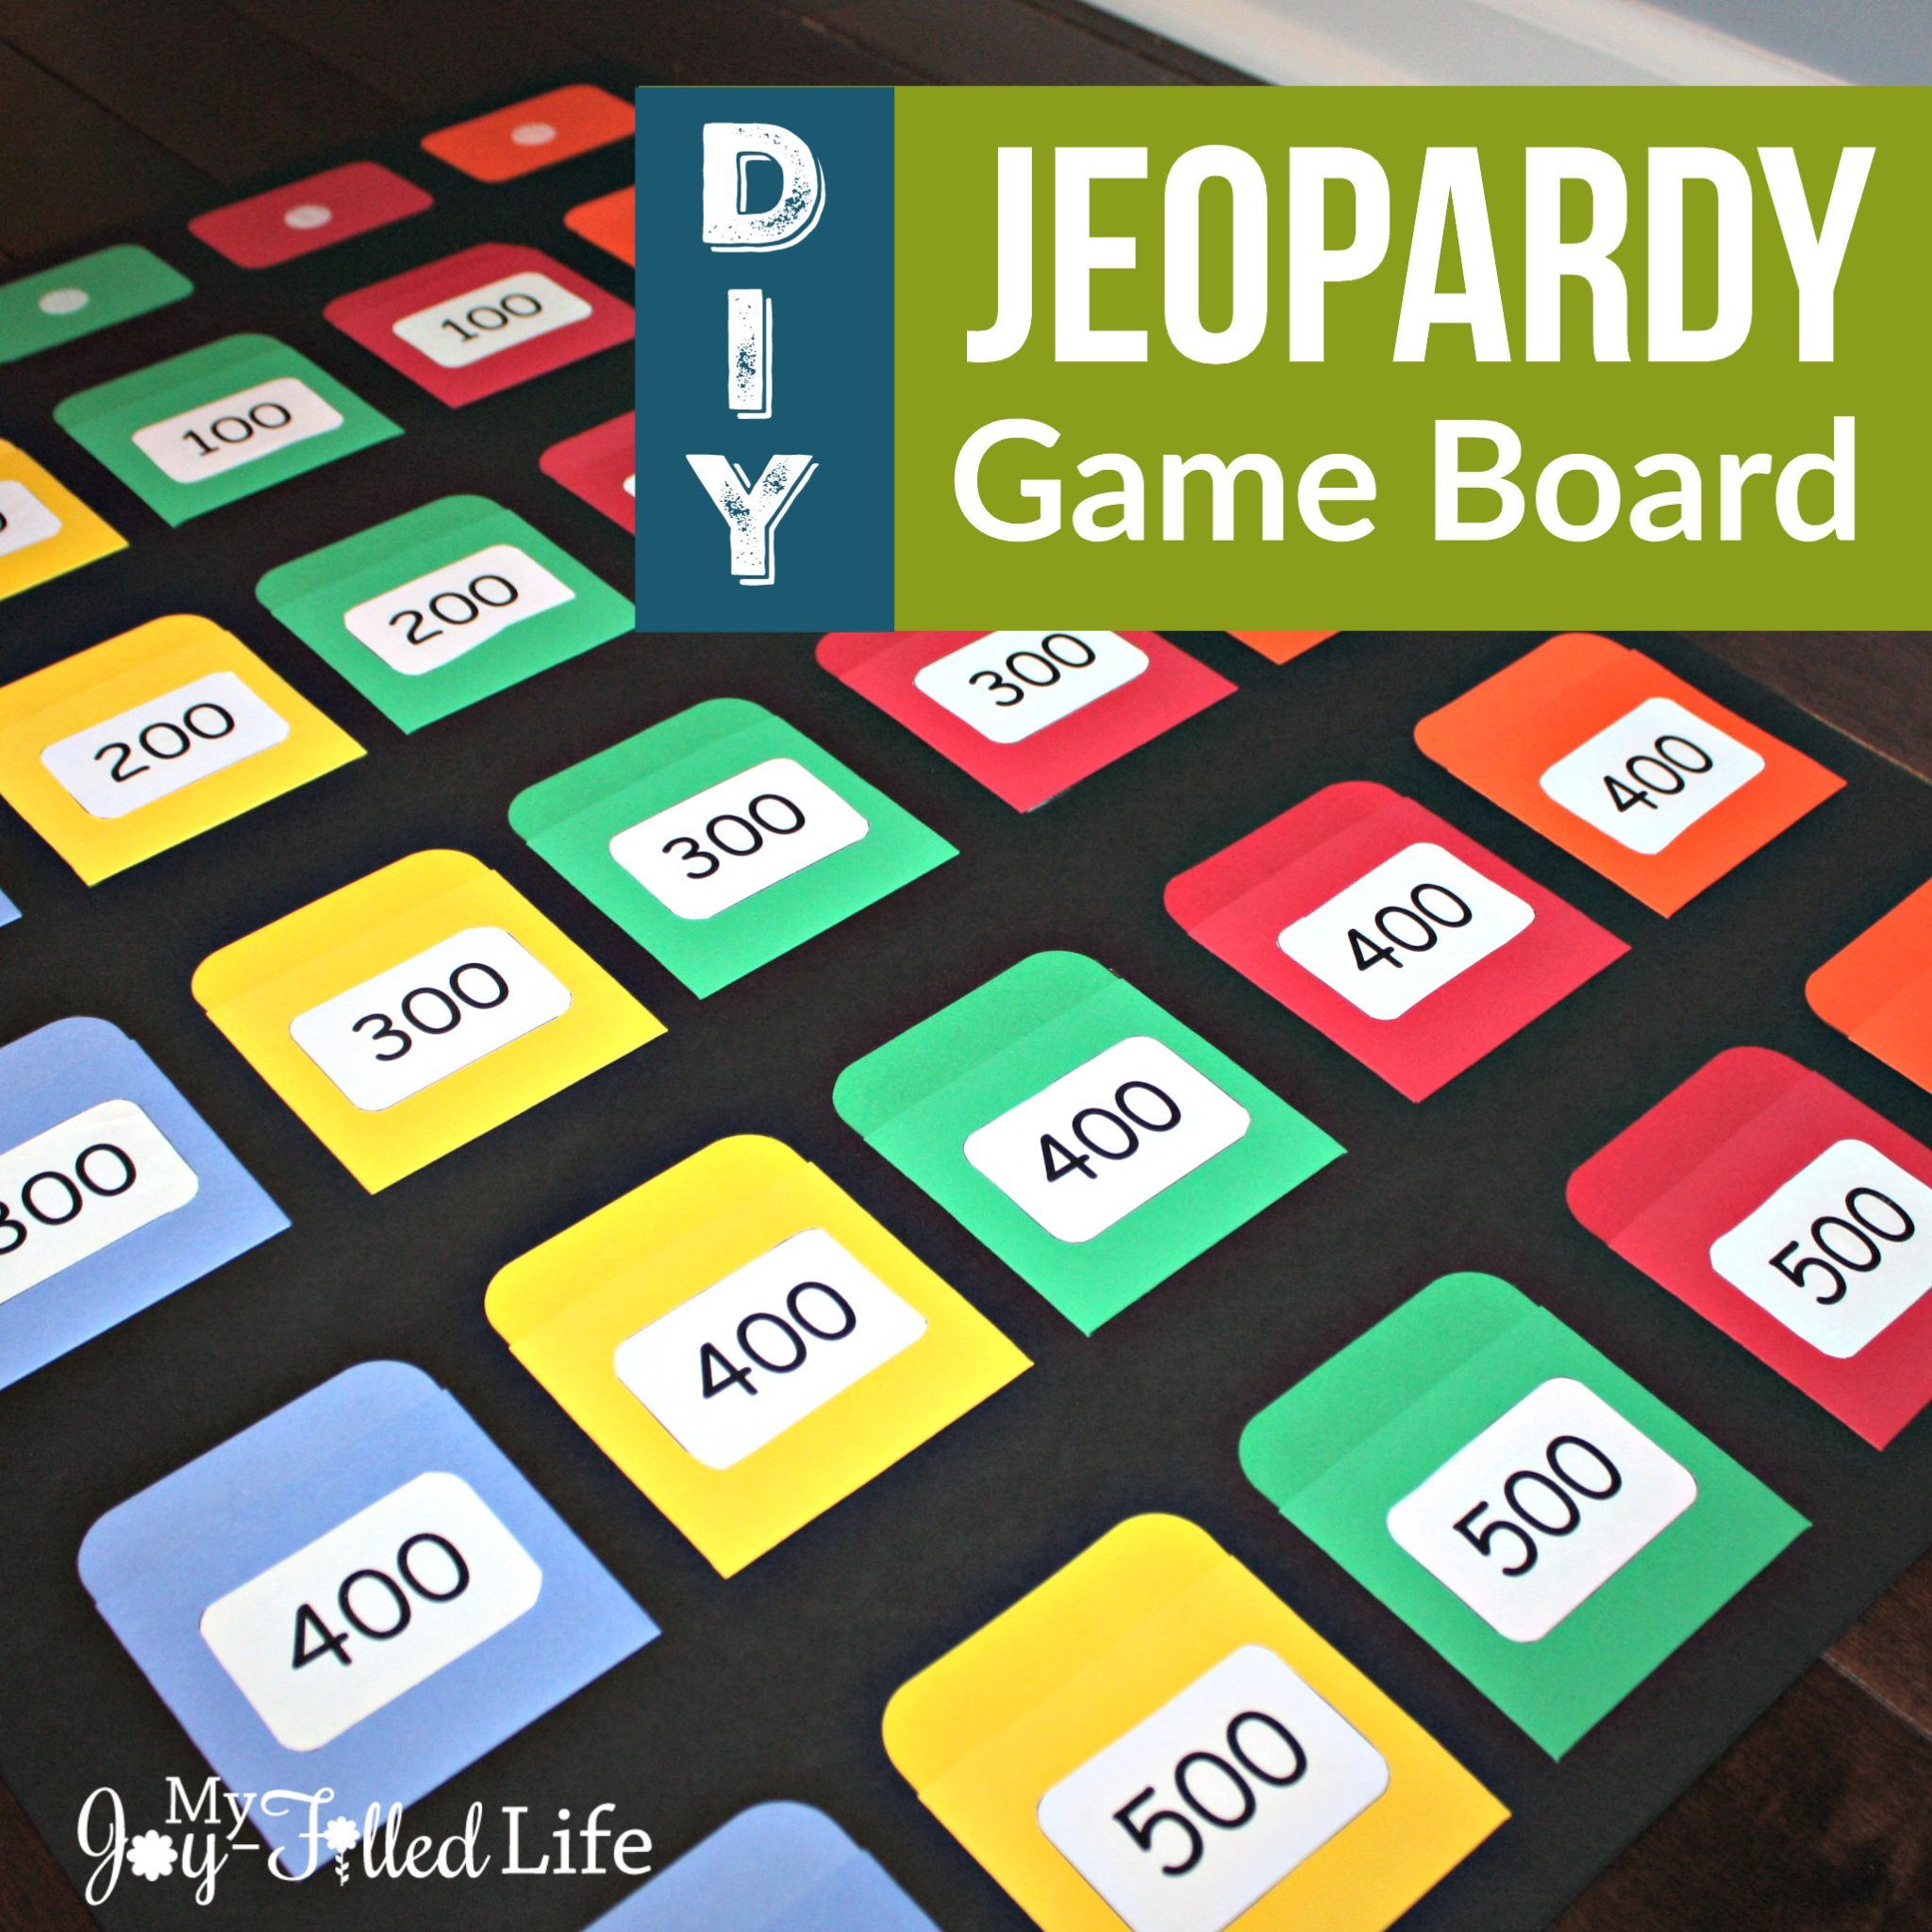 Board Game Templates, Make Your Own Classroom Game